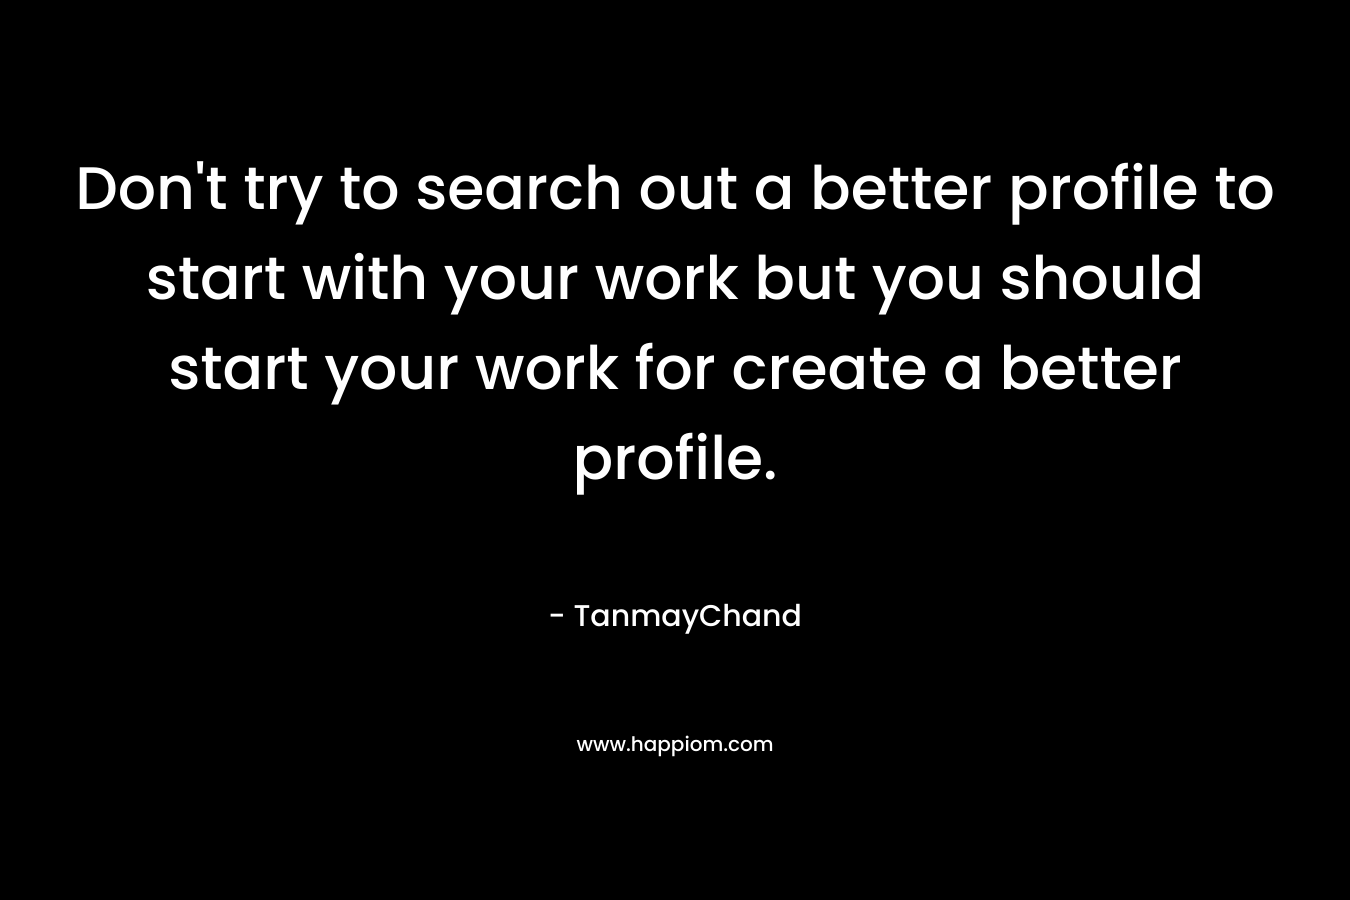 Don't try to search out a better profile to start with your work but you should start your work for create a better profile.